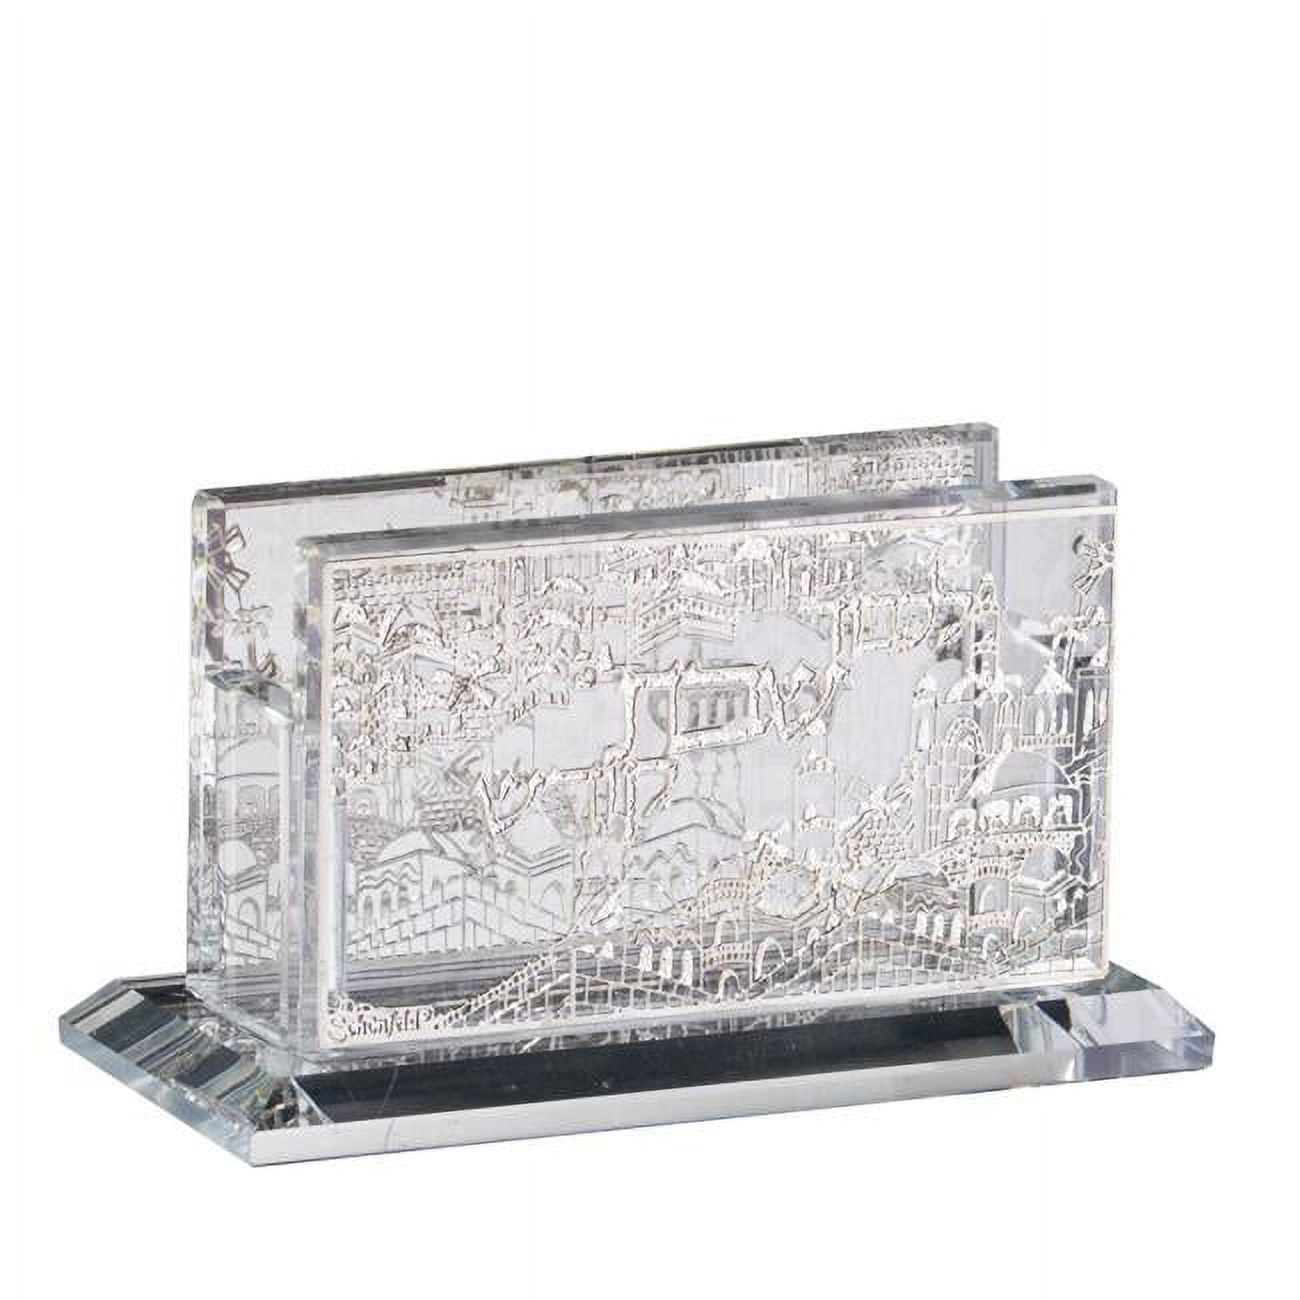 Picture of Schonfeld Collection 16552 3 x 1.5 x 2 in. Crystal Mini Match Box Holder, Jerusalem Silver